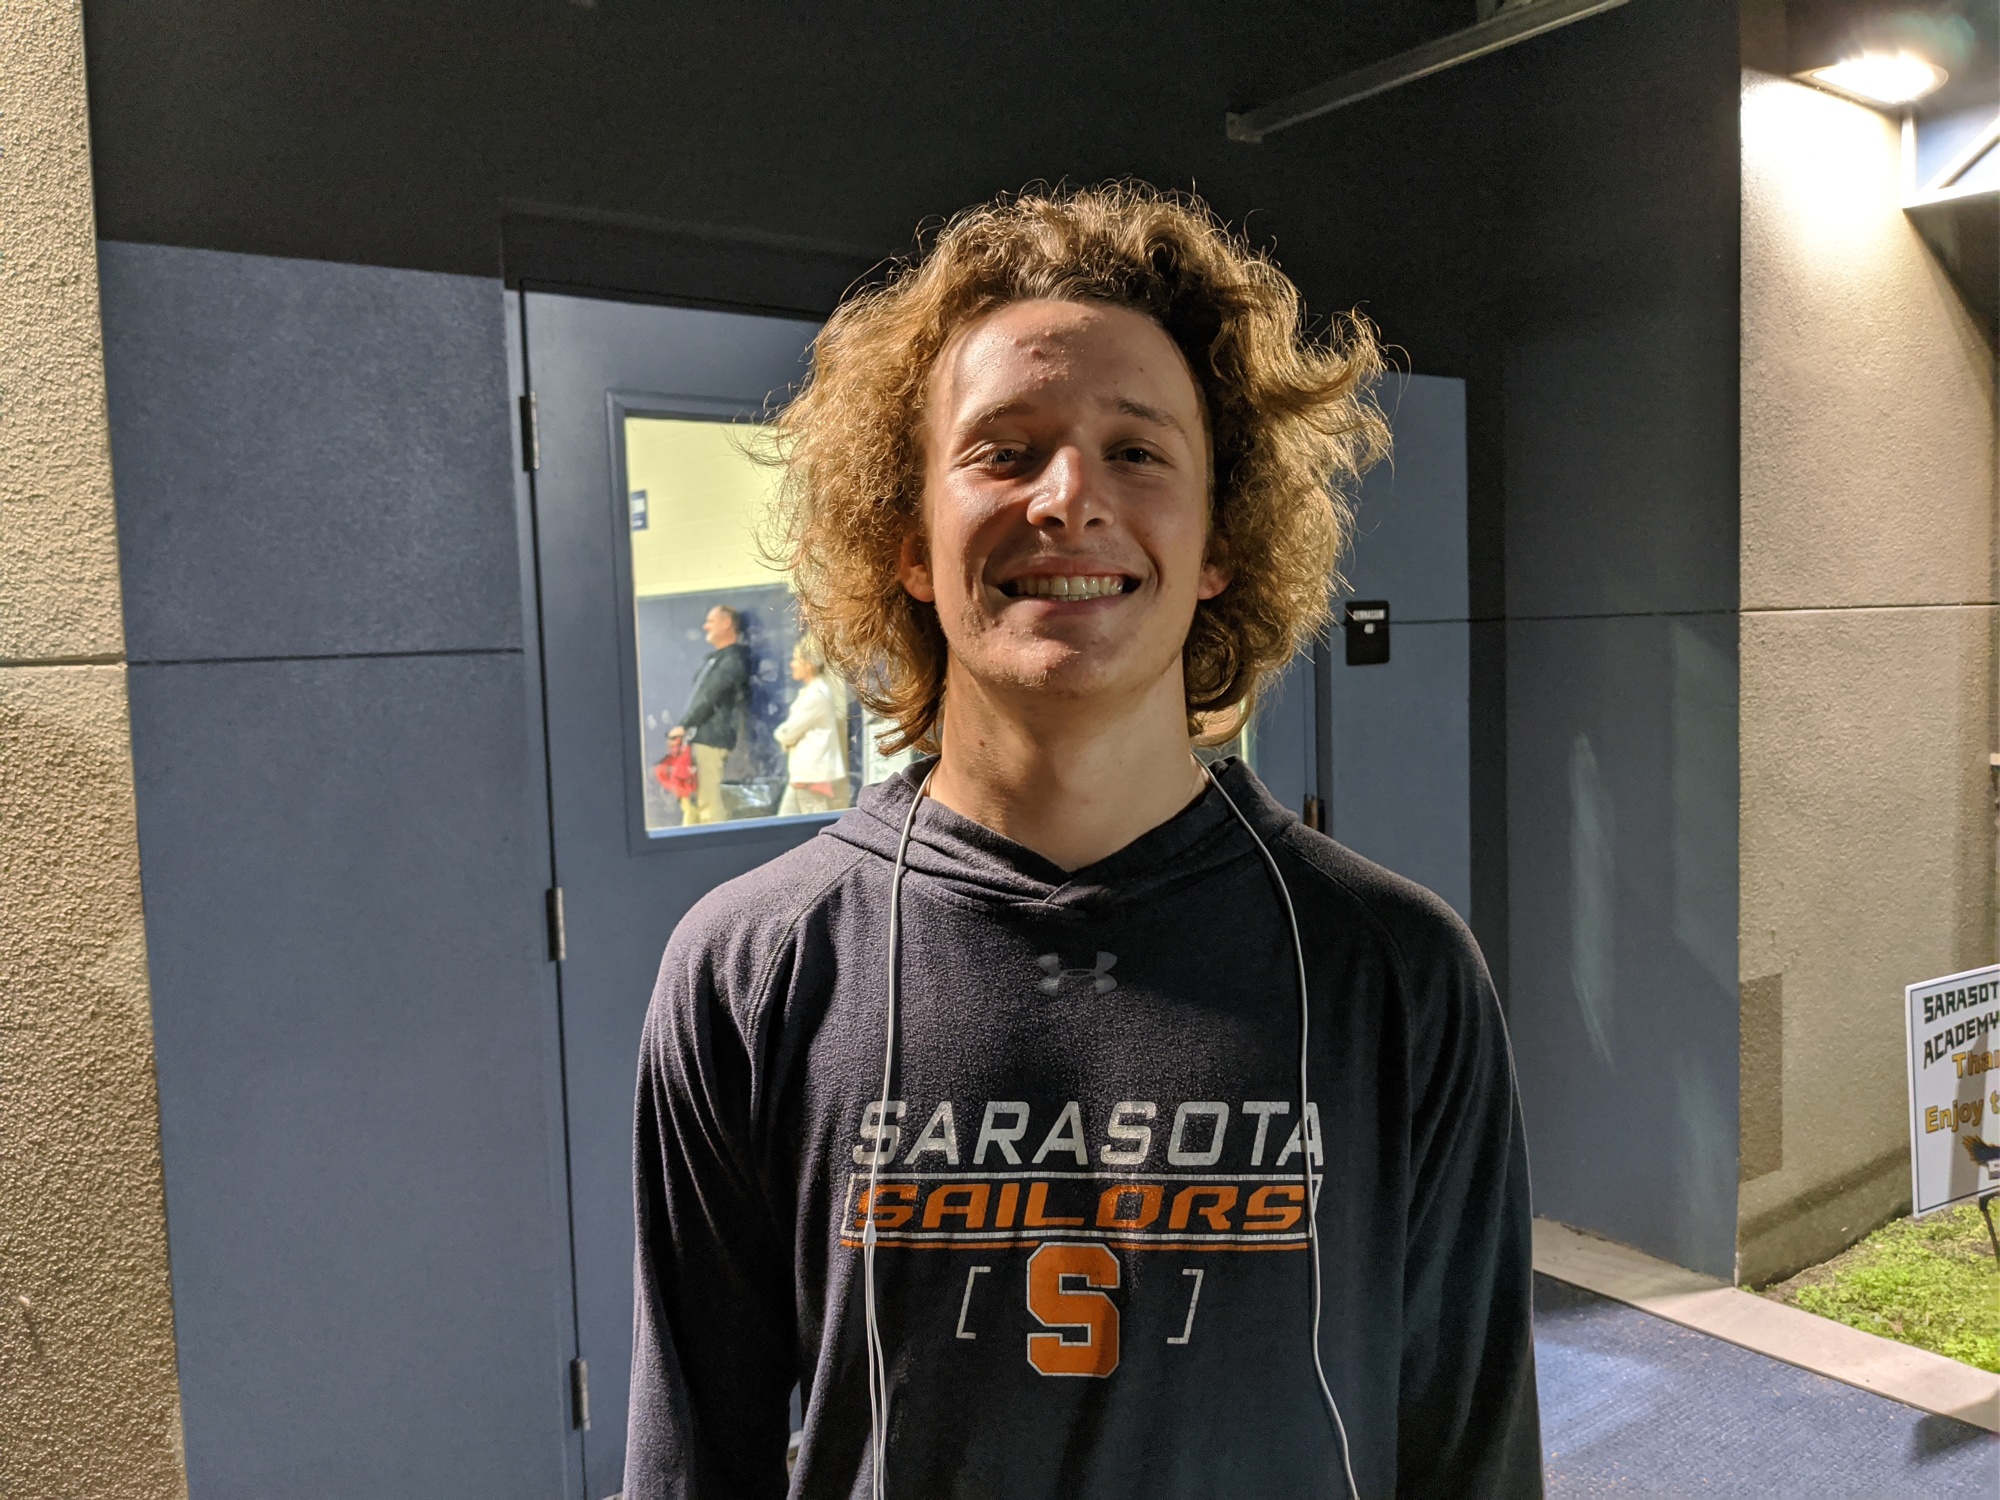 Sarasota High senior Blaise Freeman said he will be disappointed if he is not able to walk across the stage at graduation.